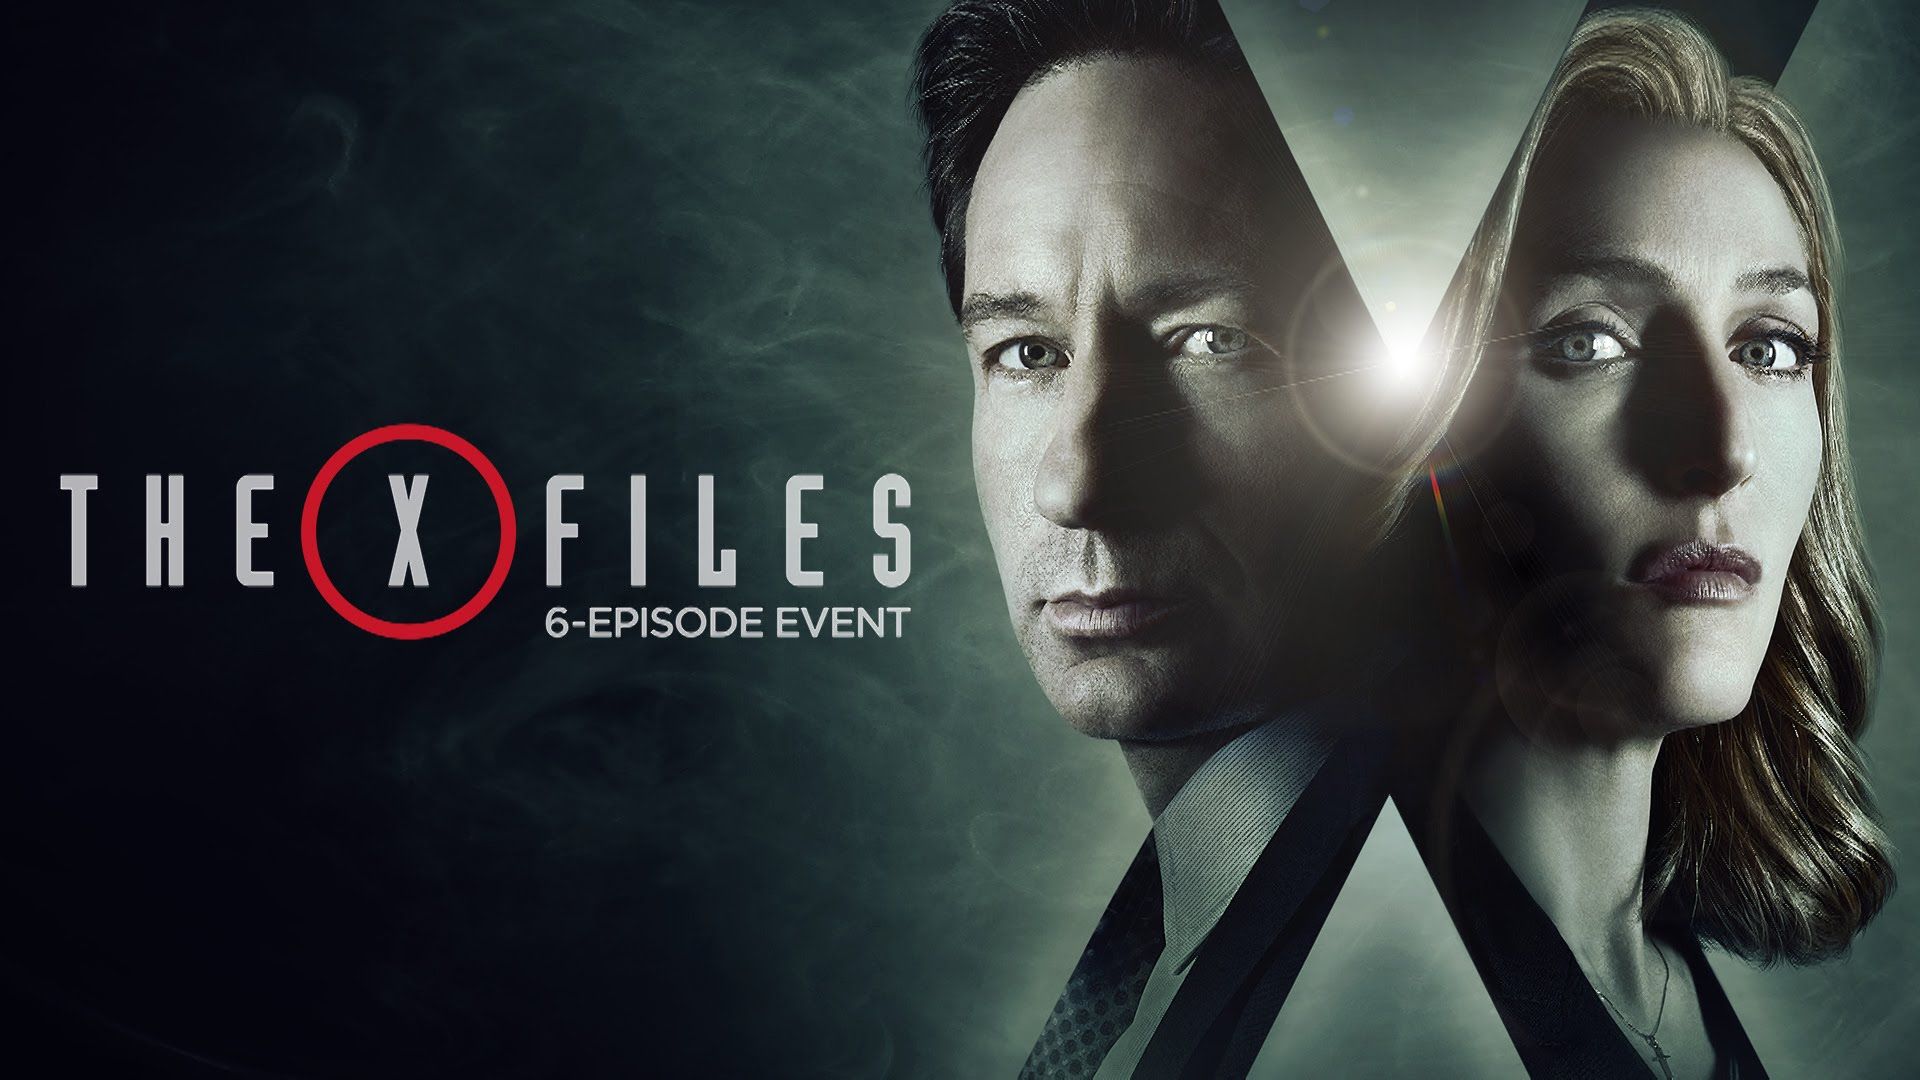 Movie Poster - The X Files wallpaper HD. Free desktop background